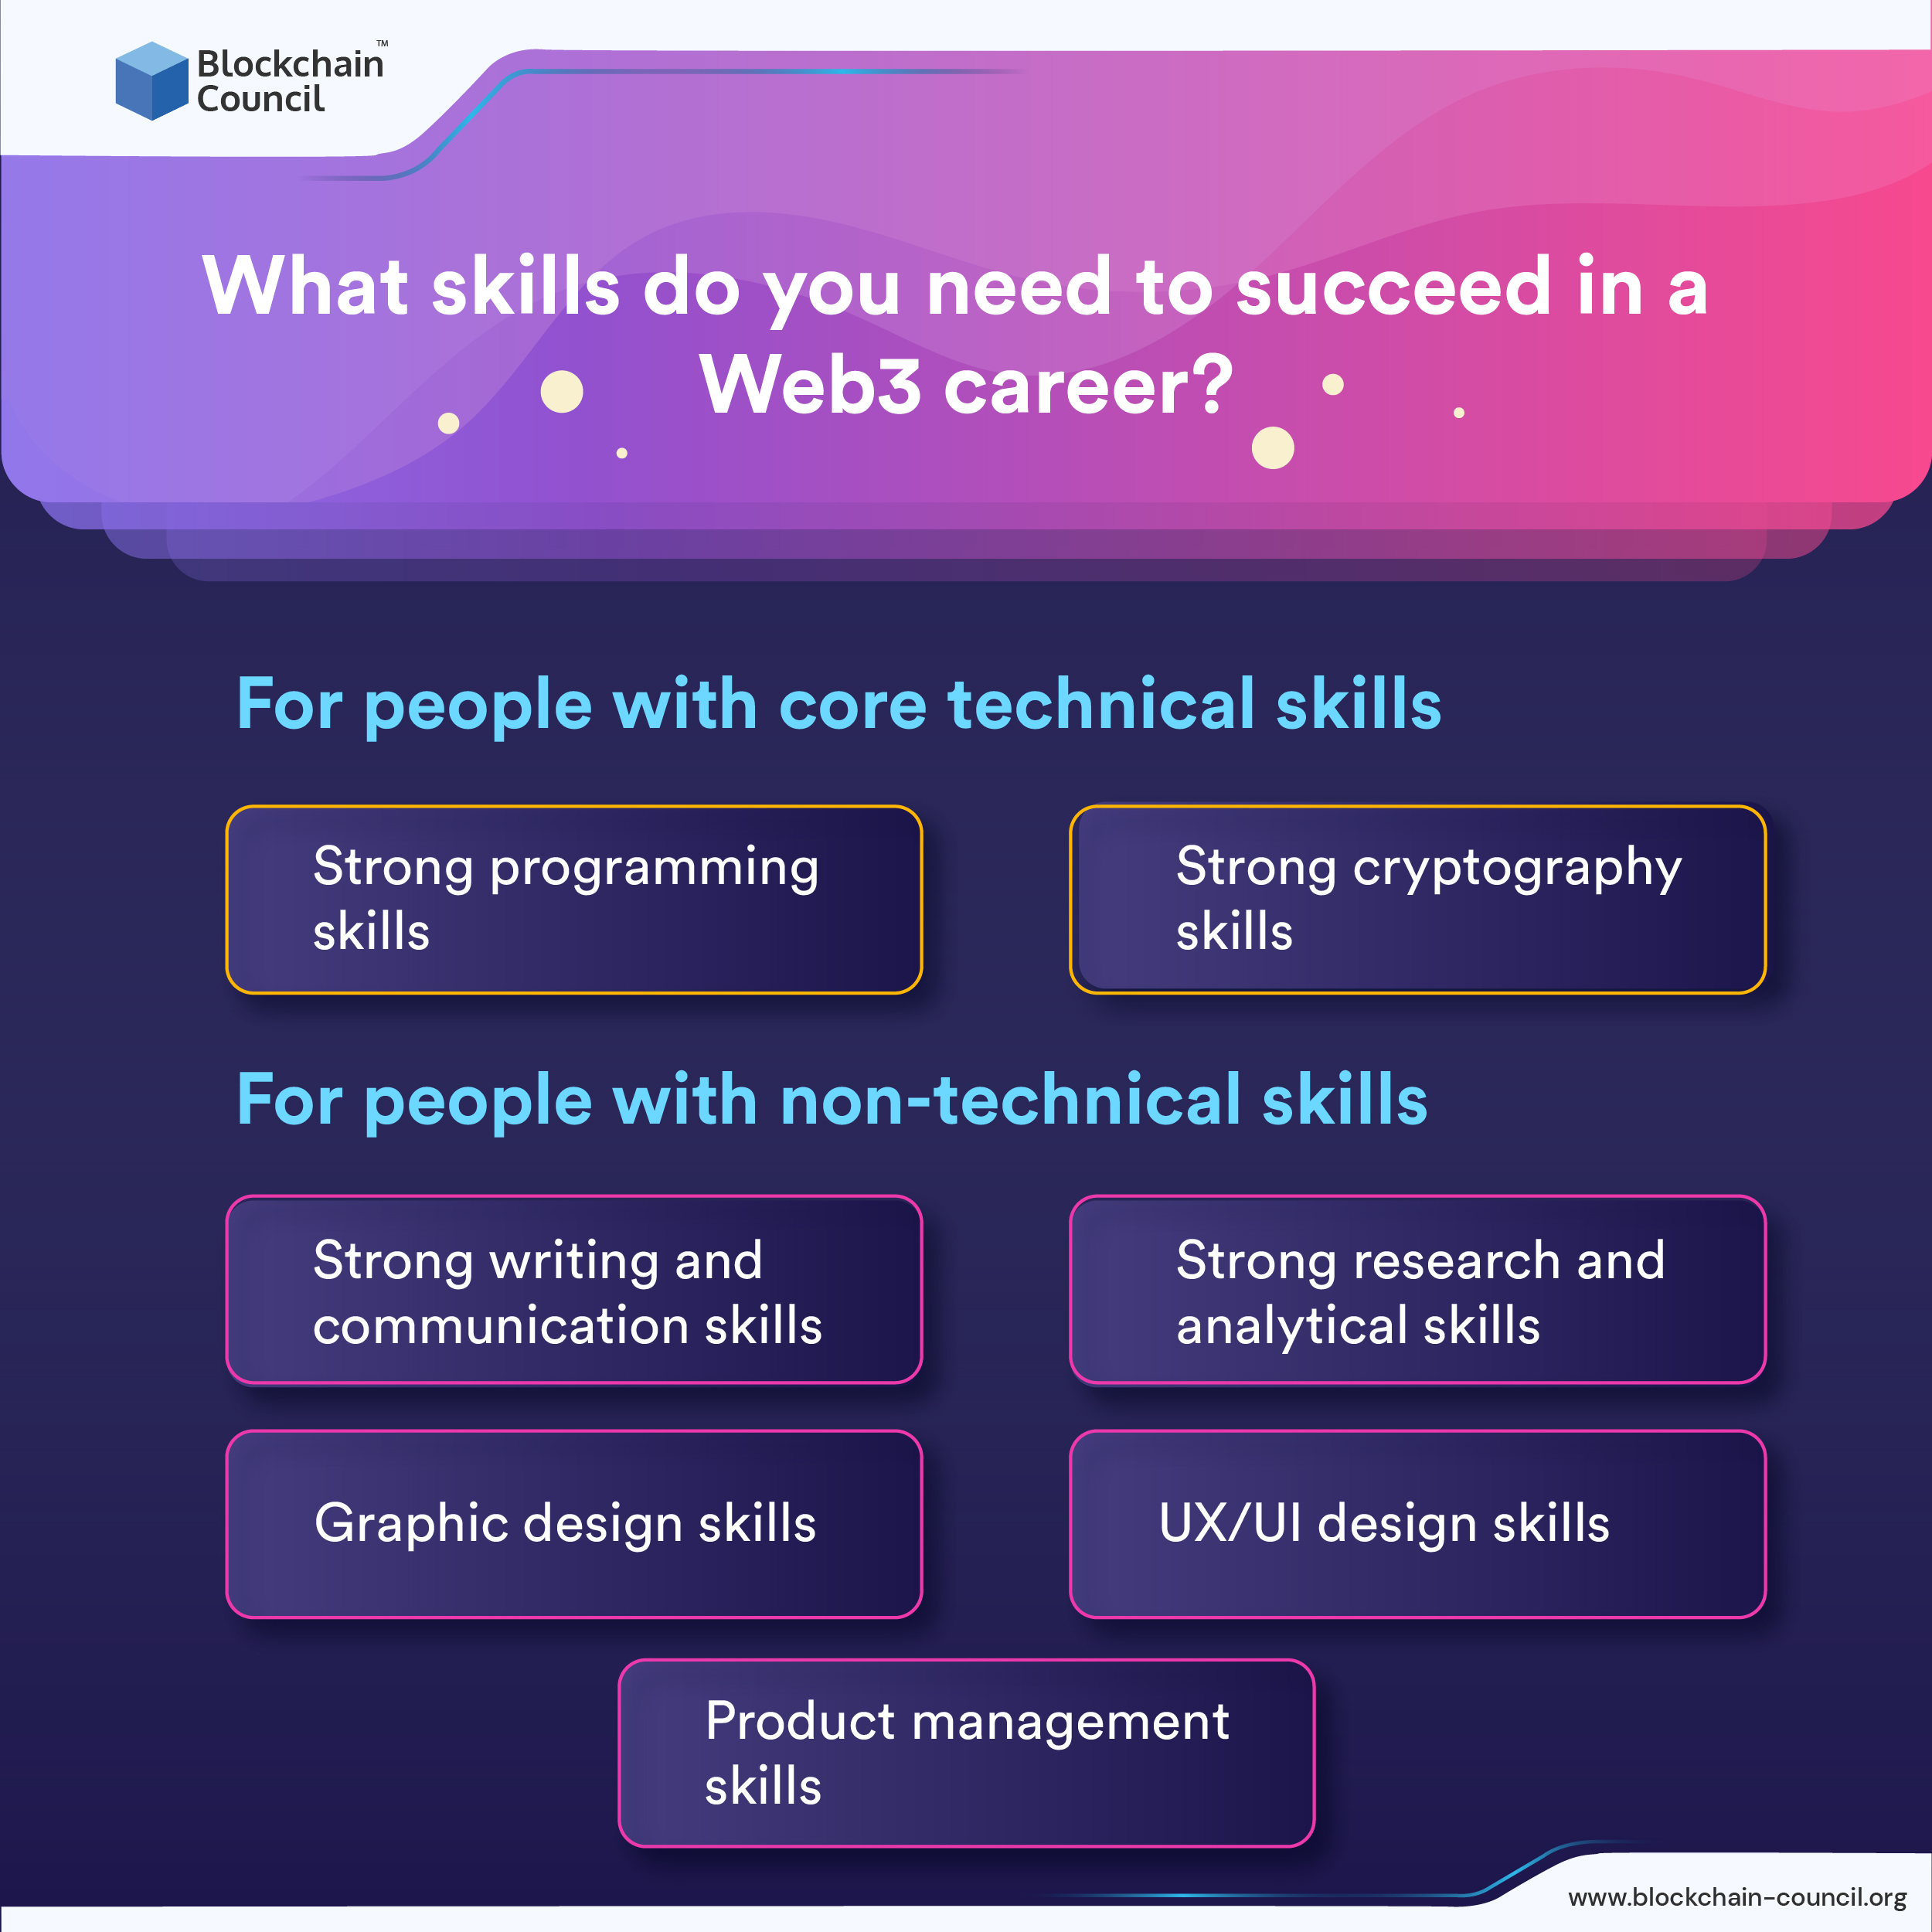 What skills do you need to succeed in a Web3 career?